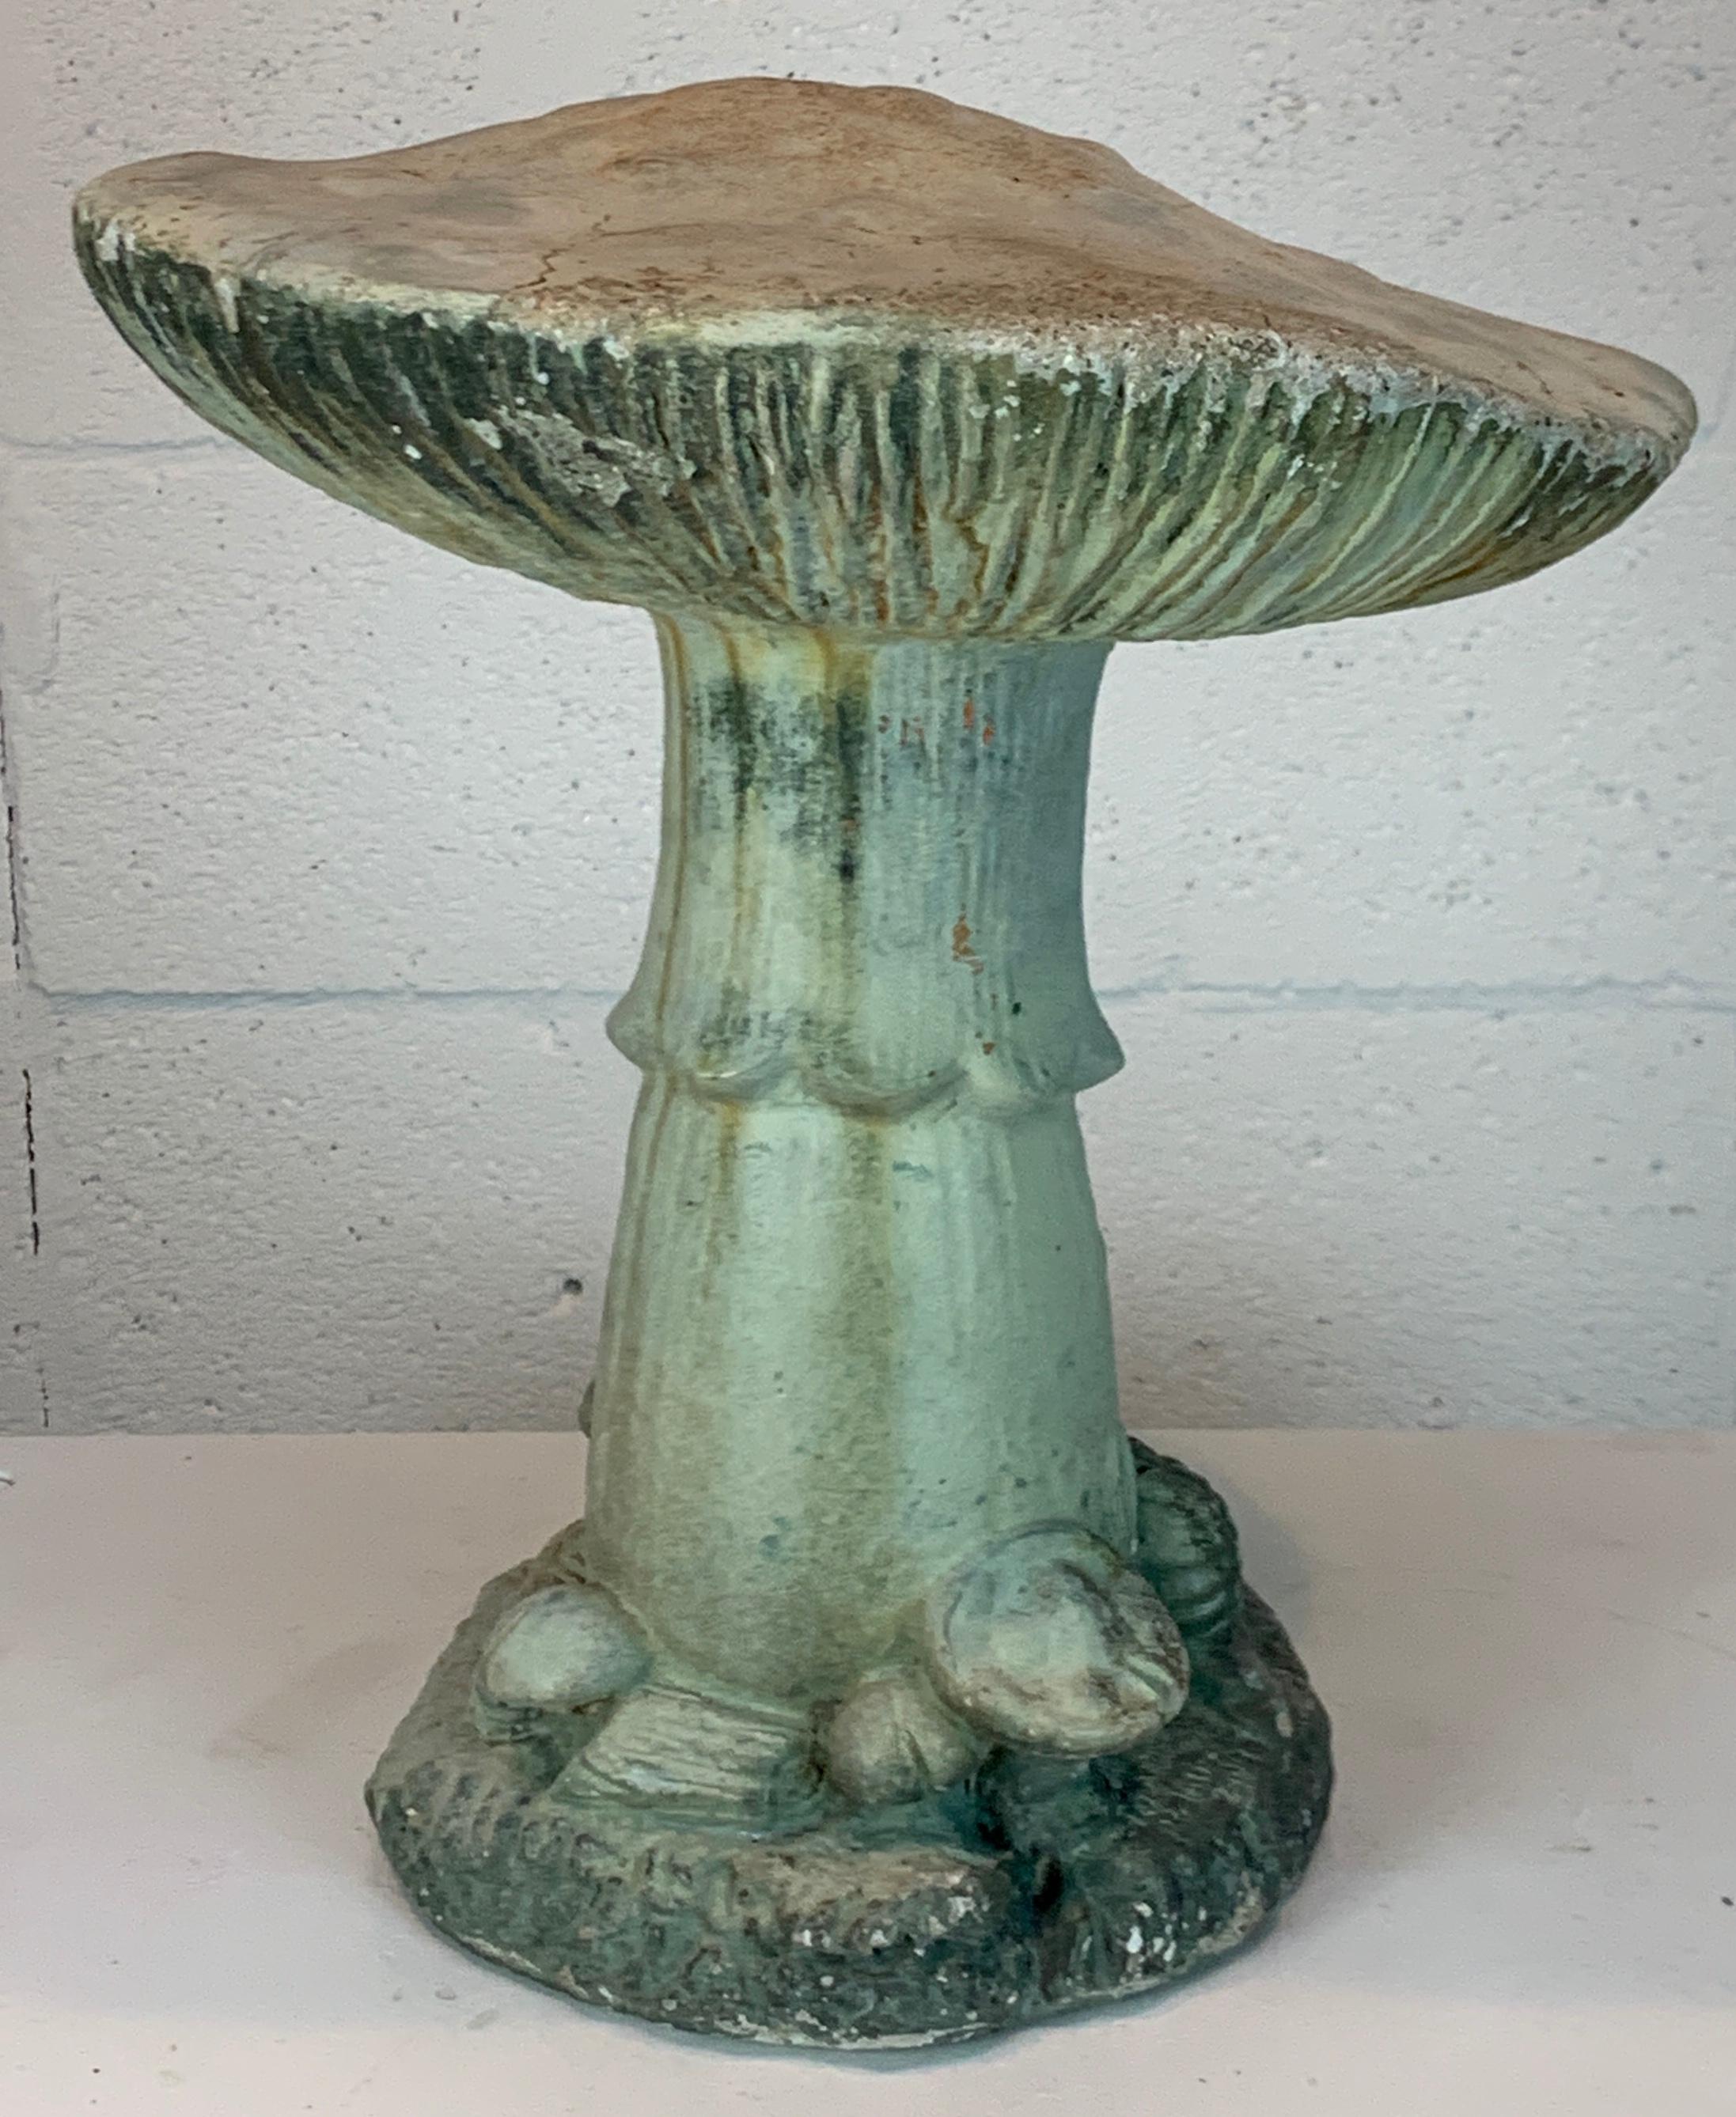 Vintage Whimsical Cast Stone Mushroom Garden Ornament, circa 1960 In Good Condition For Sale In West Palm Beach, FL